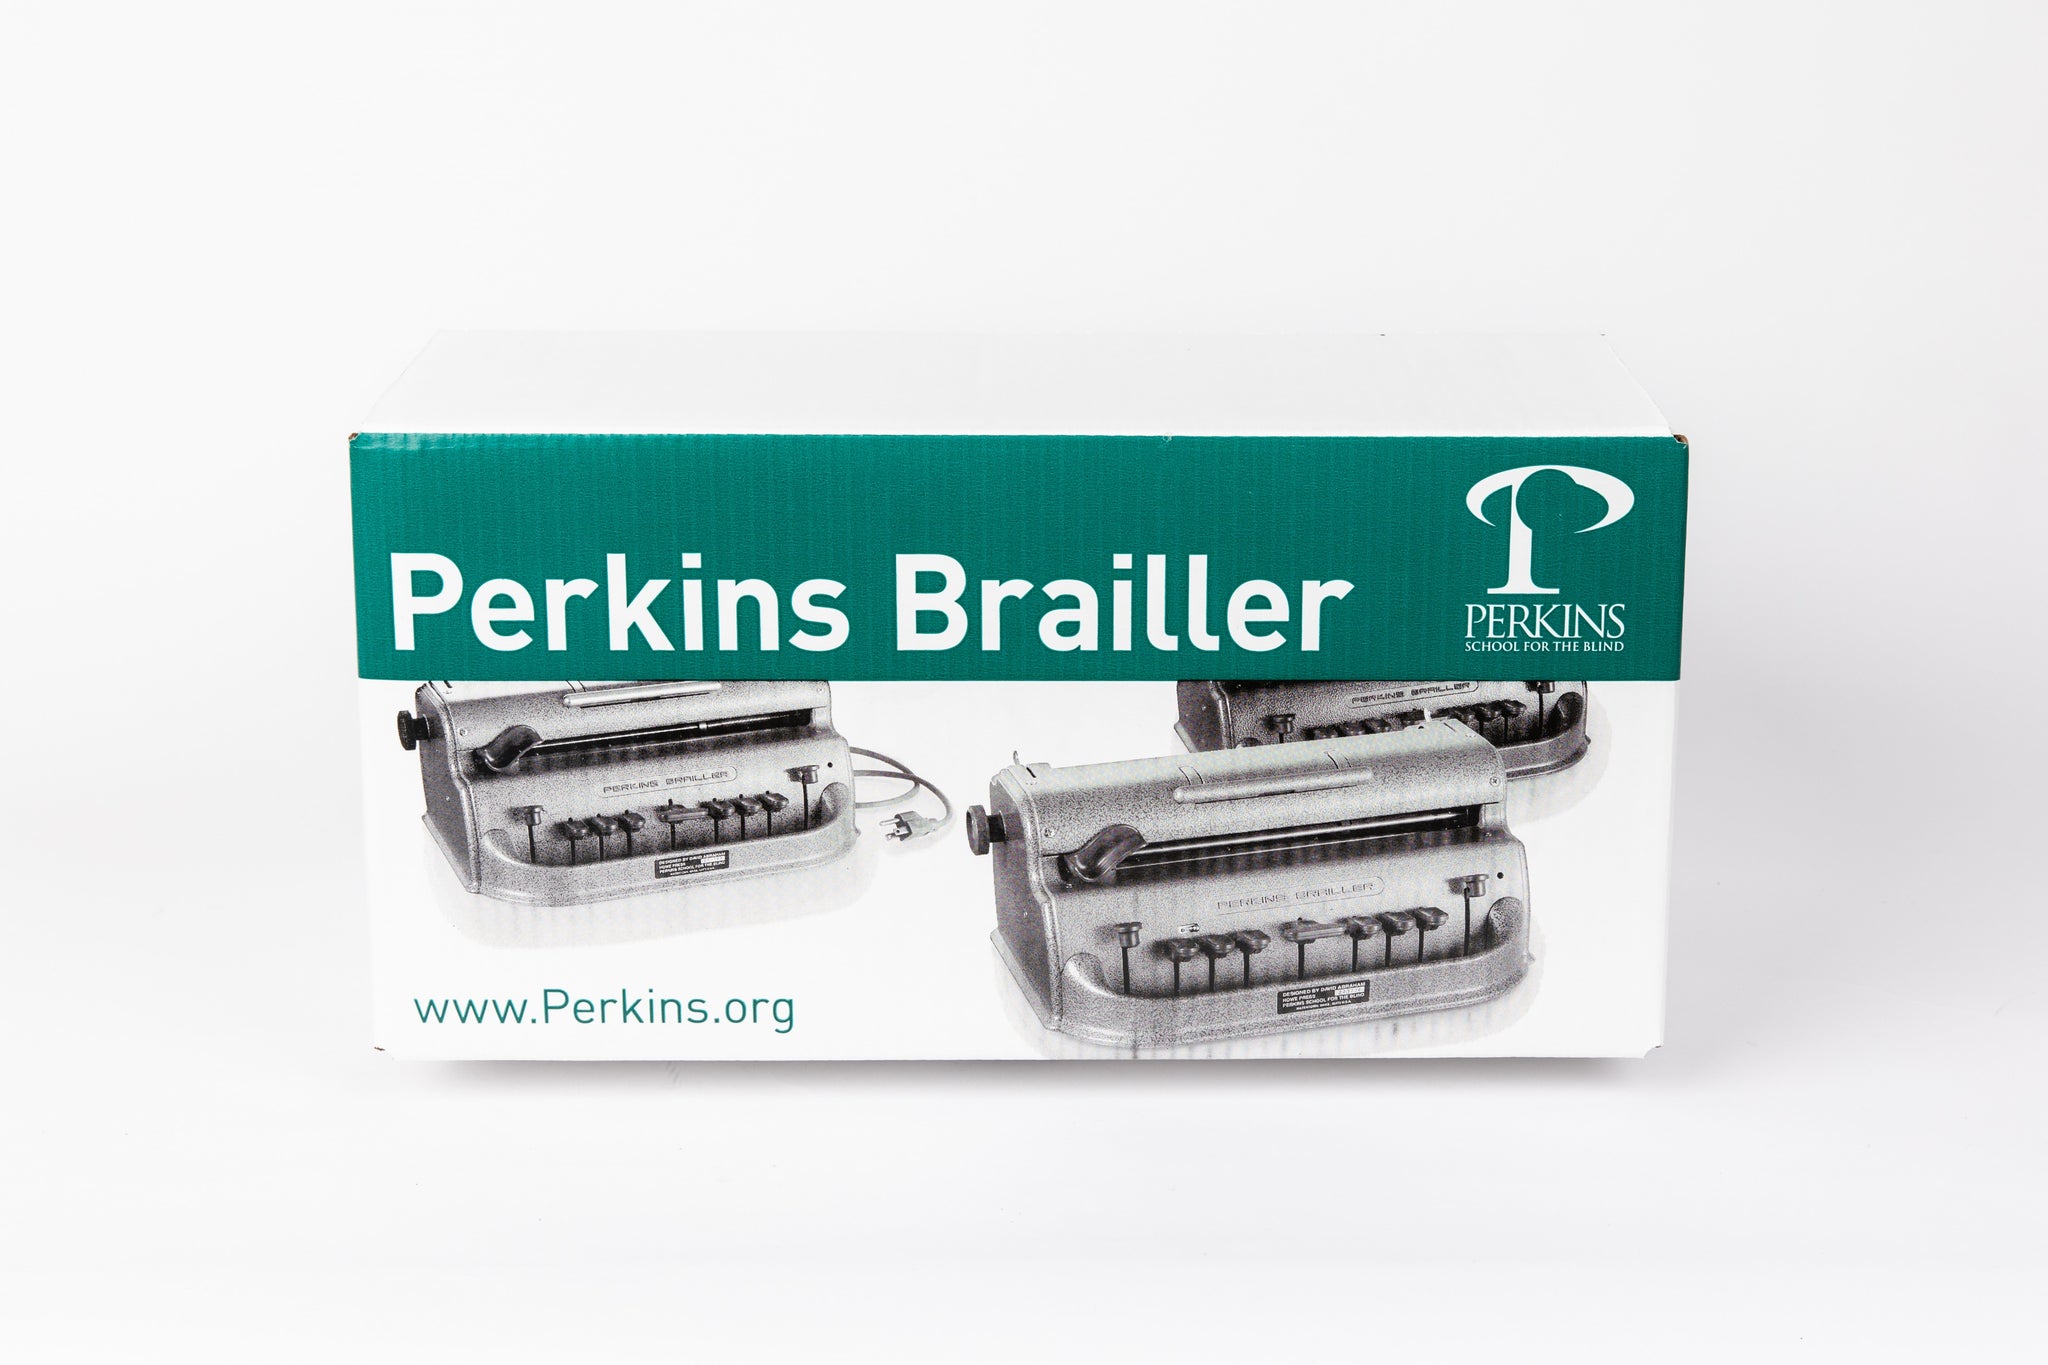 Shipping Box for Perkins Braillers